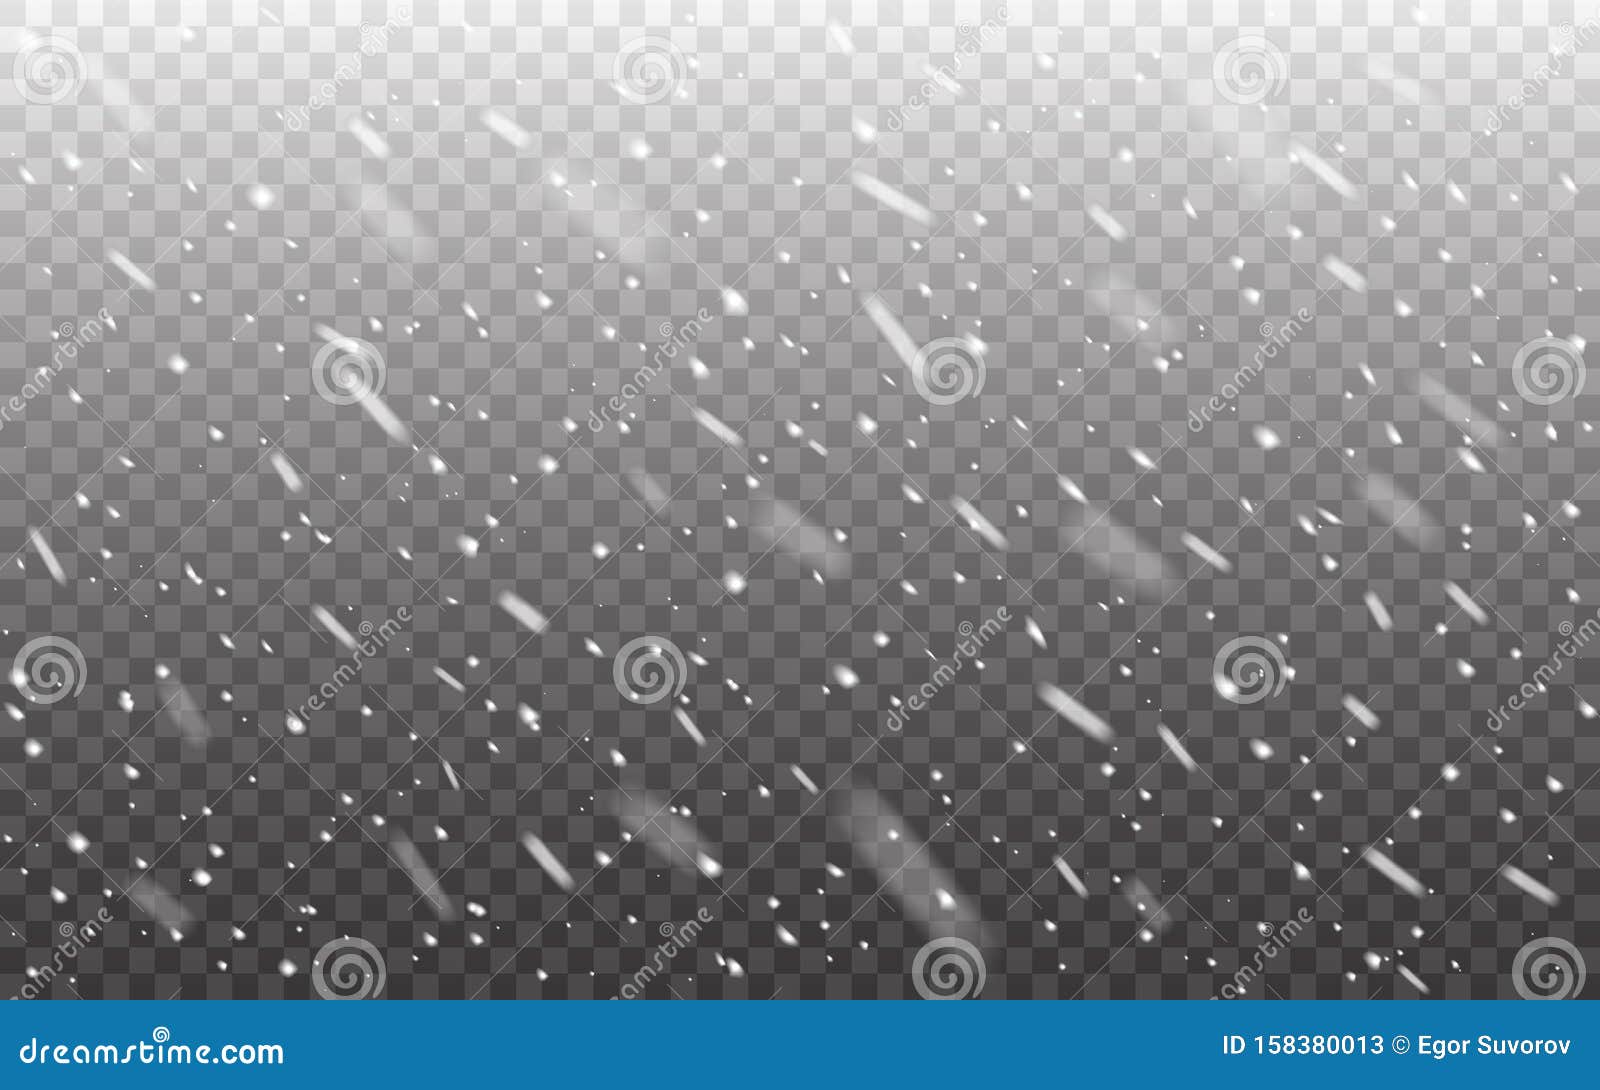 snow background. snowfall realistic on transparent backdrop. snow template with defocused flakes. christmas texture